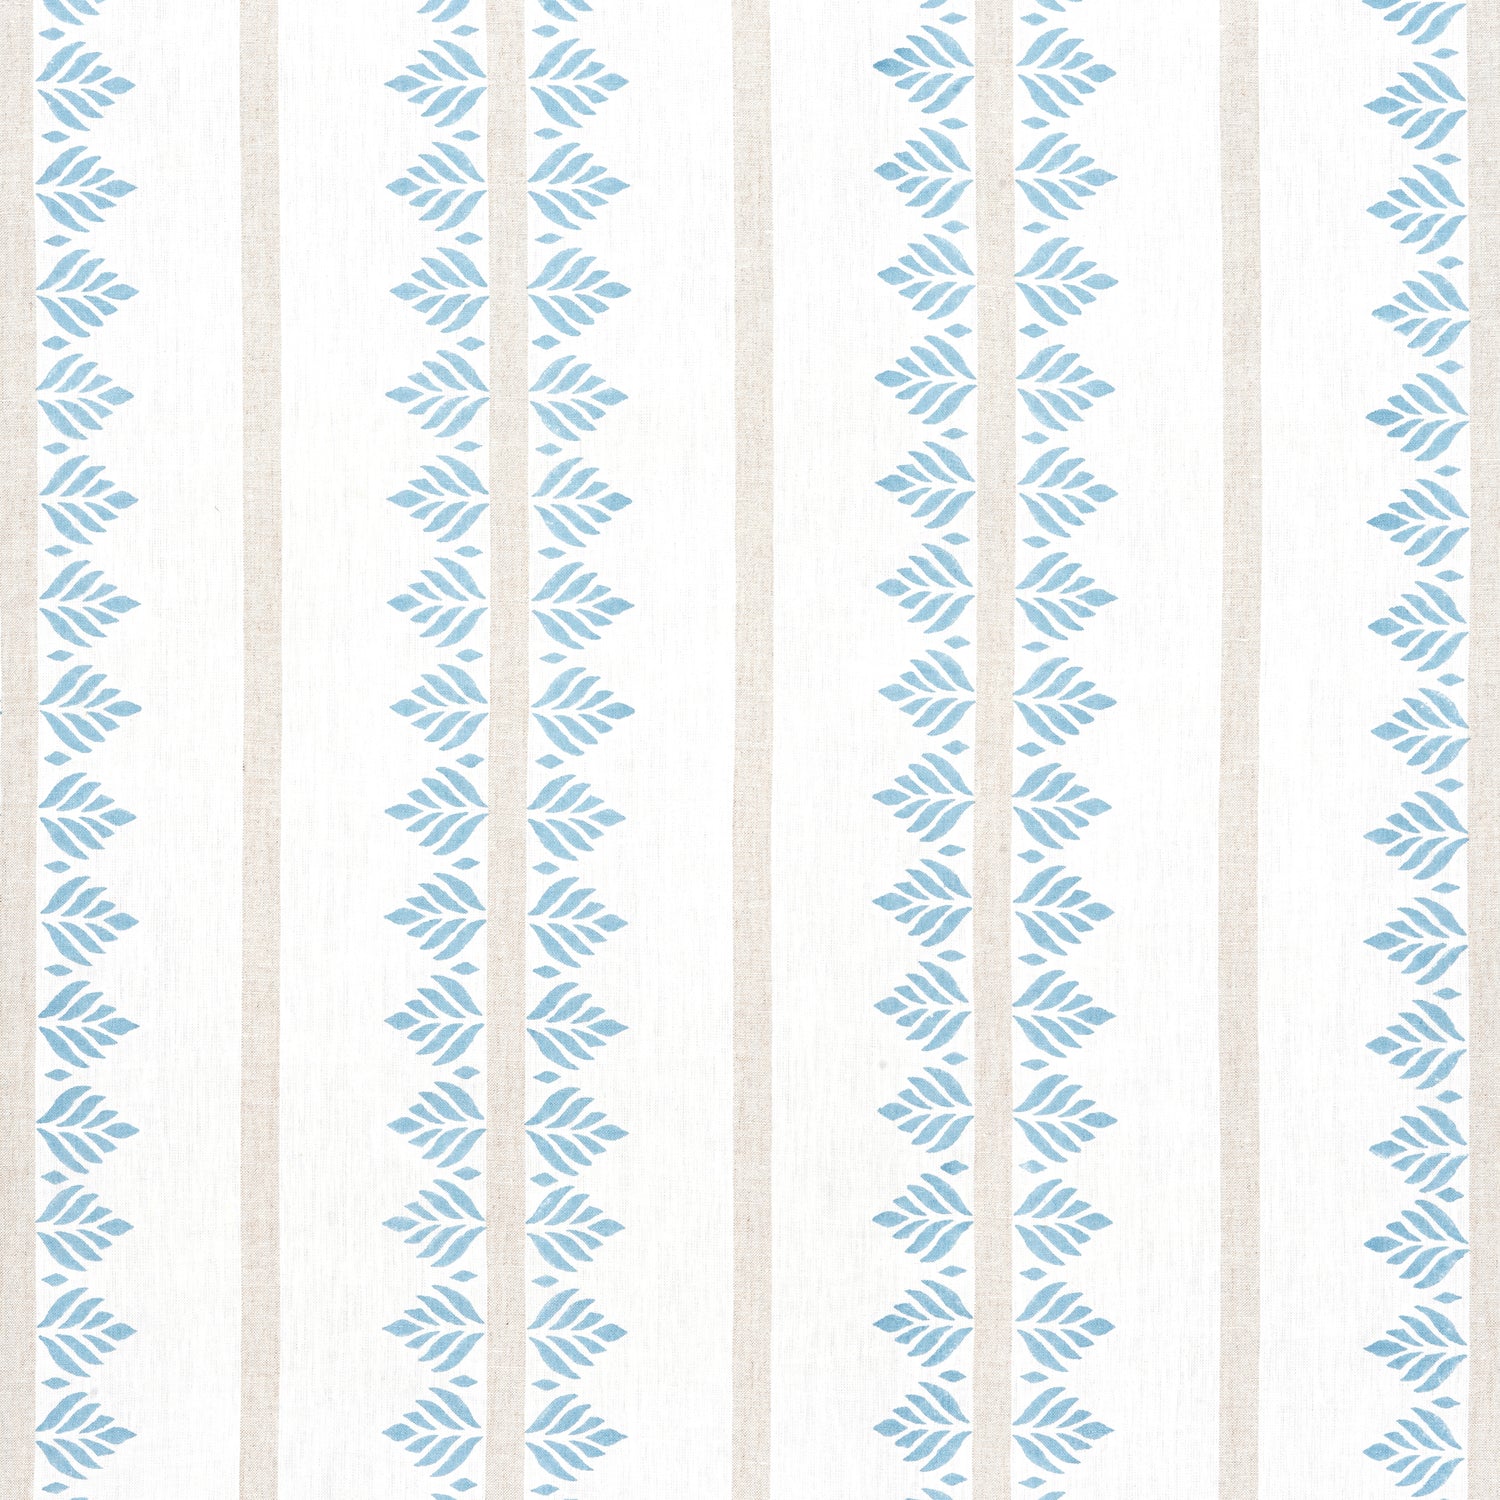 Fern Stripe fabric in spa blue color - pattern number AF15103 - by Anna French in the Antilles collection